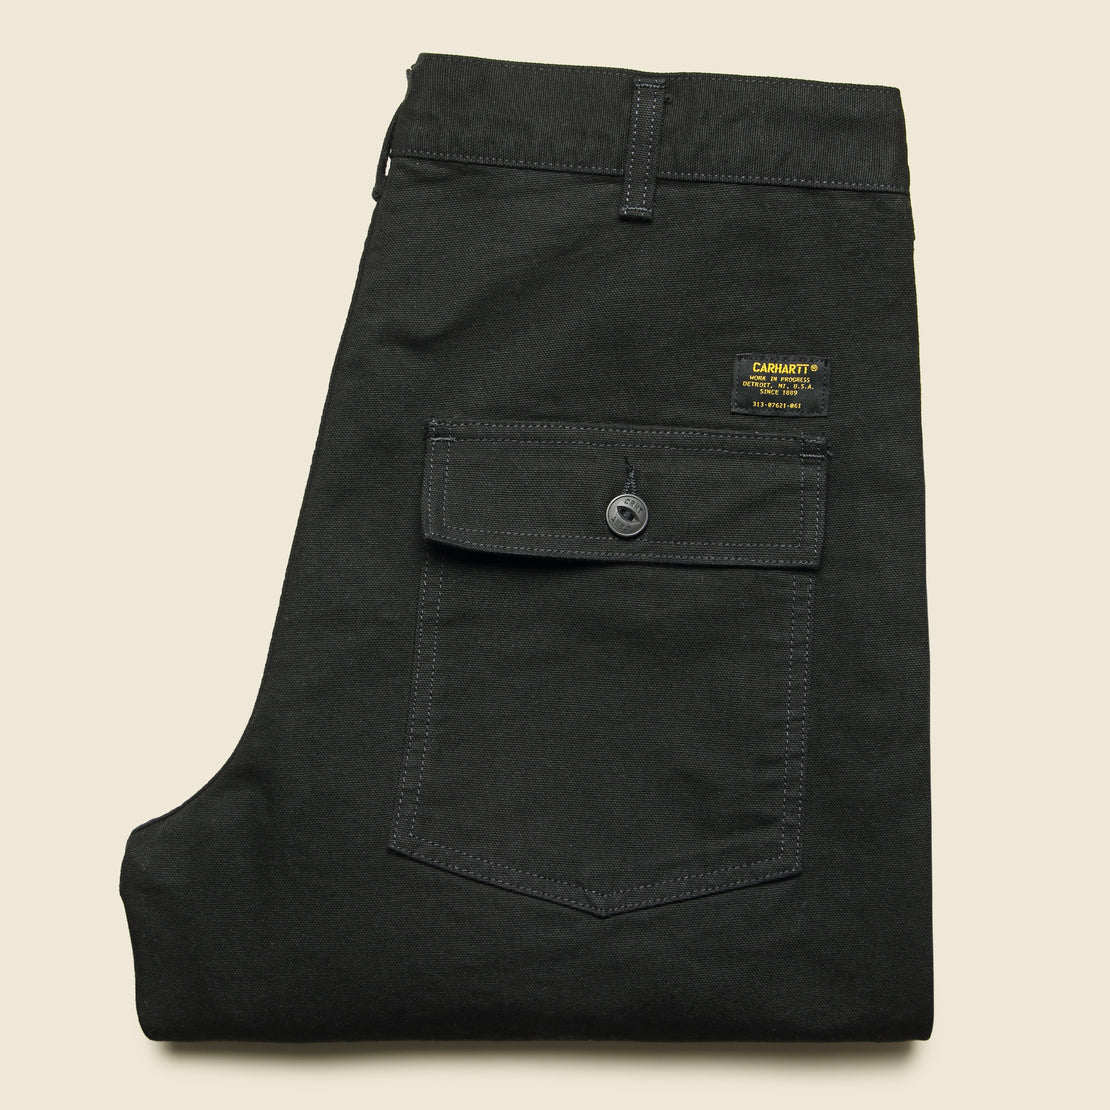 Fatigue Pant - Black - Carhartt WIP - STAG Provisions - Pants - Twill